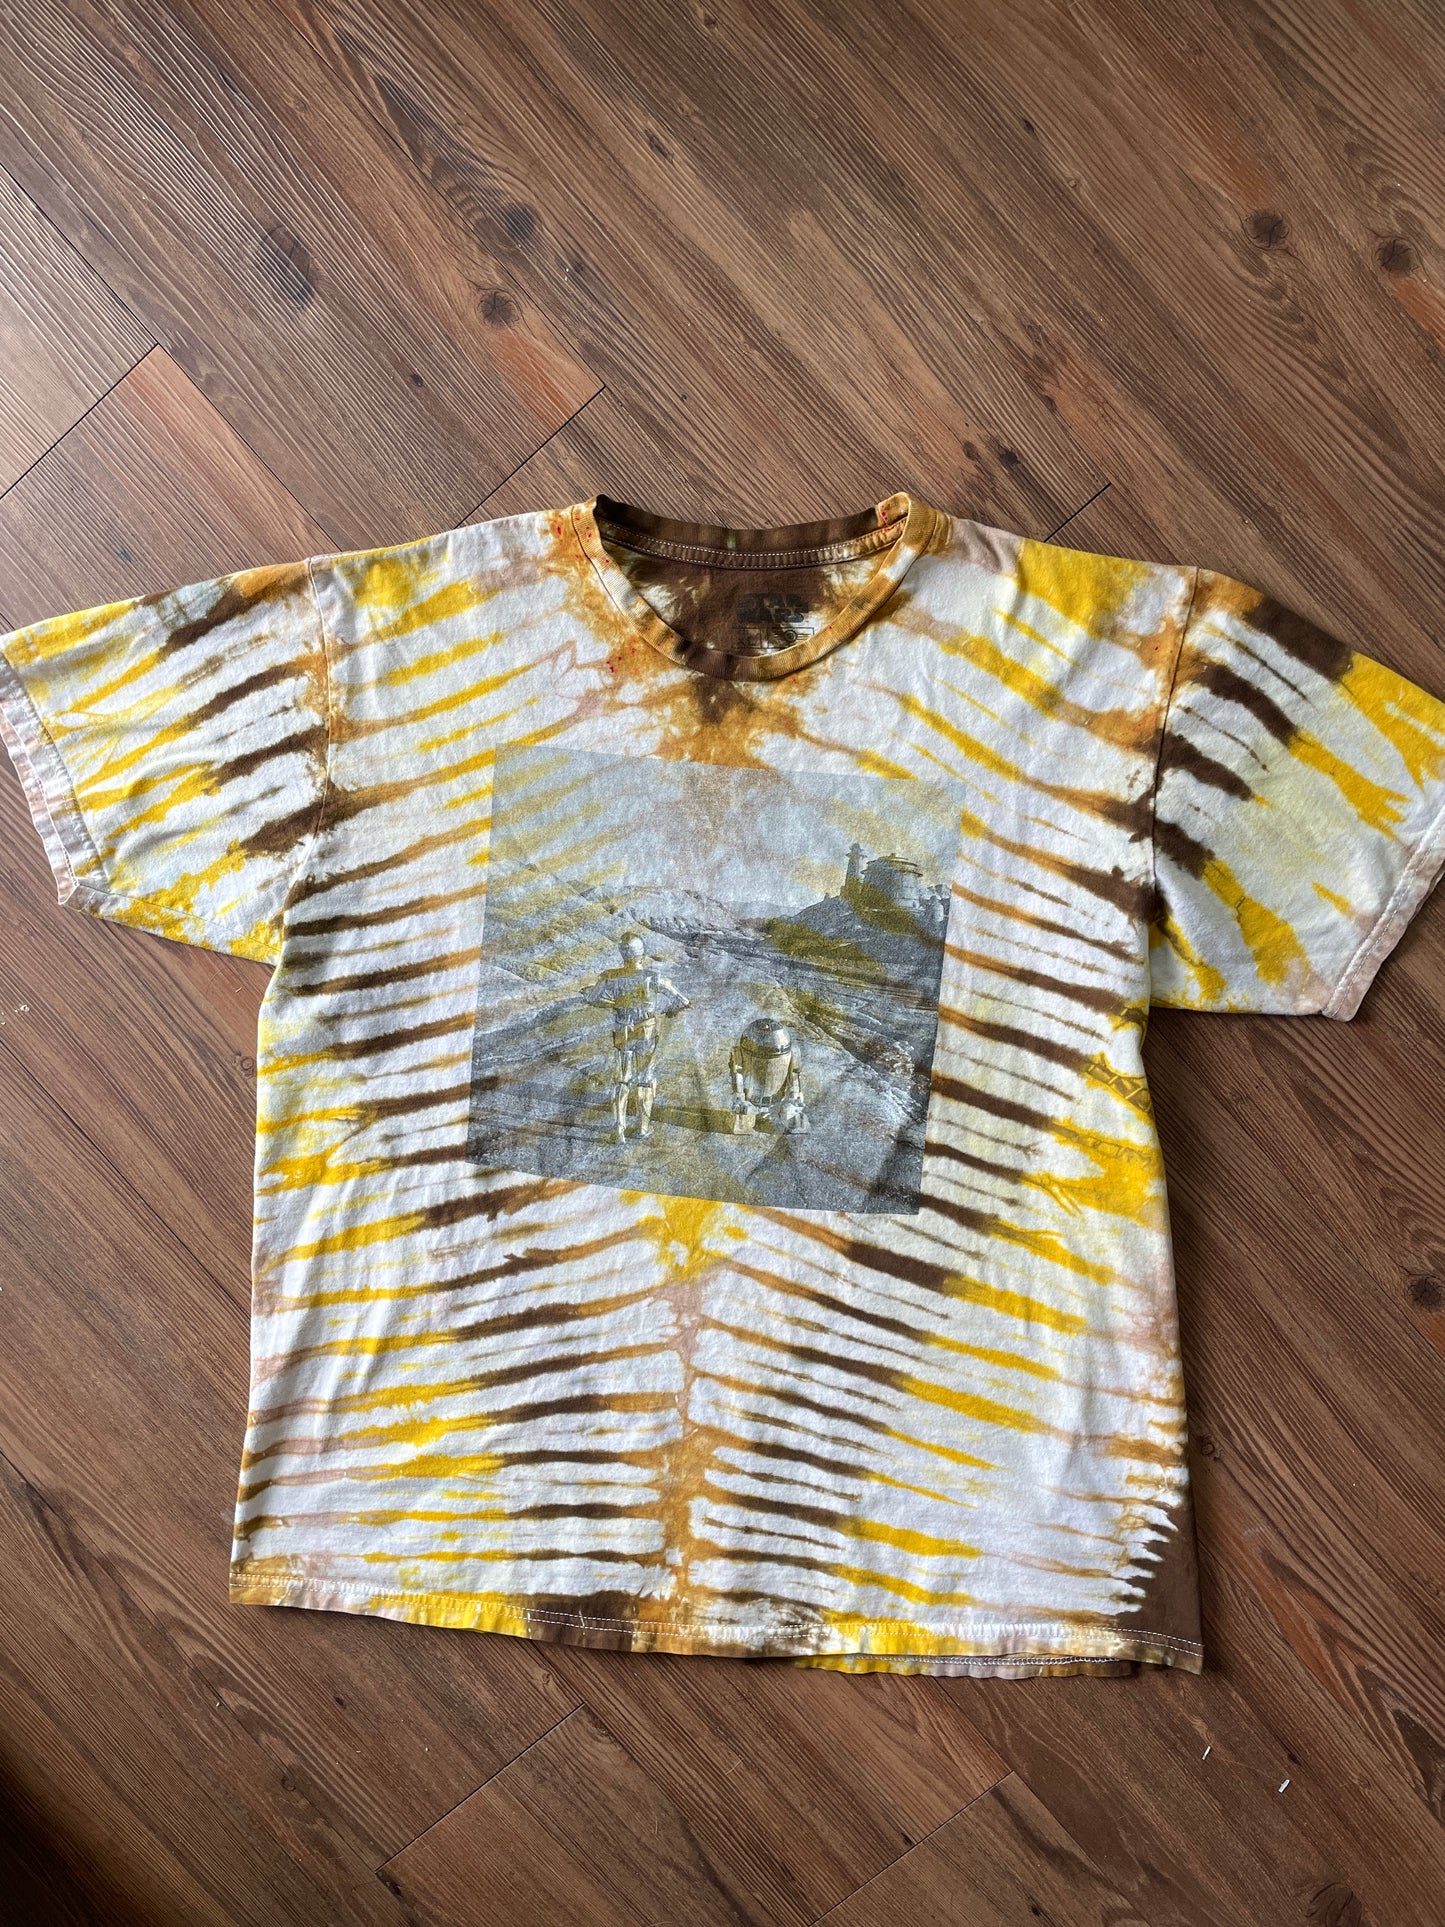 XL Men’s R2-D2 and C3PO Tattooine Handmade Tie Dye T-Shirt | Star Wars Yellow and Brown Short Sleeve